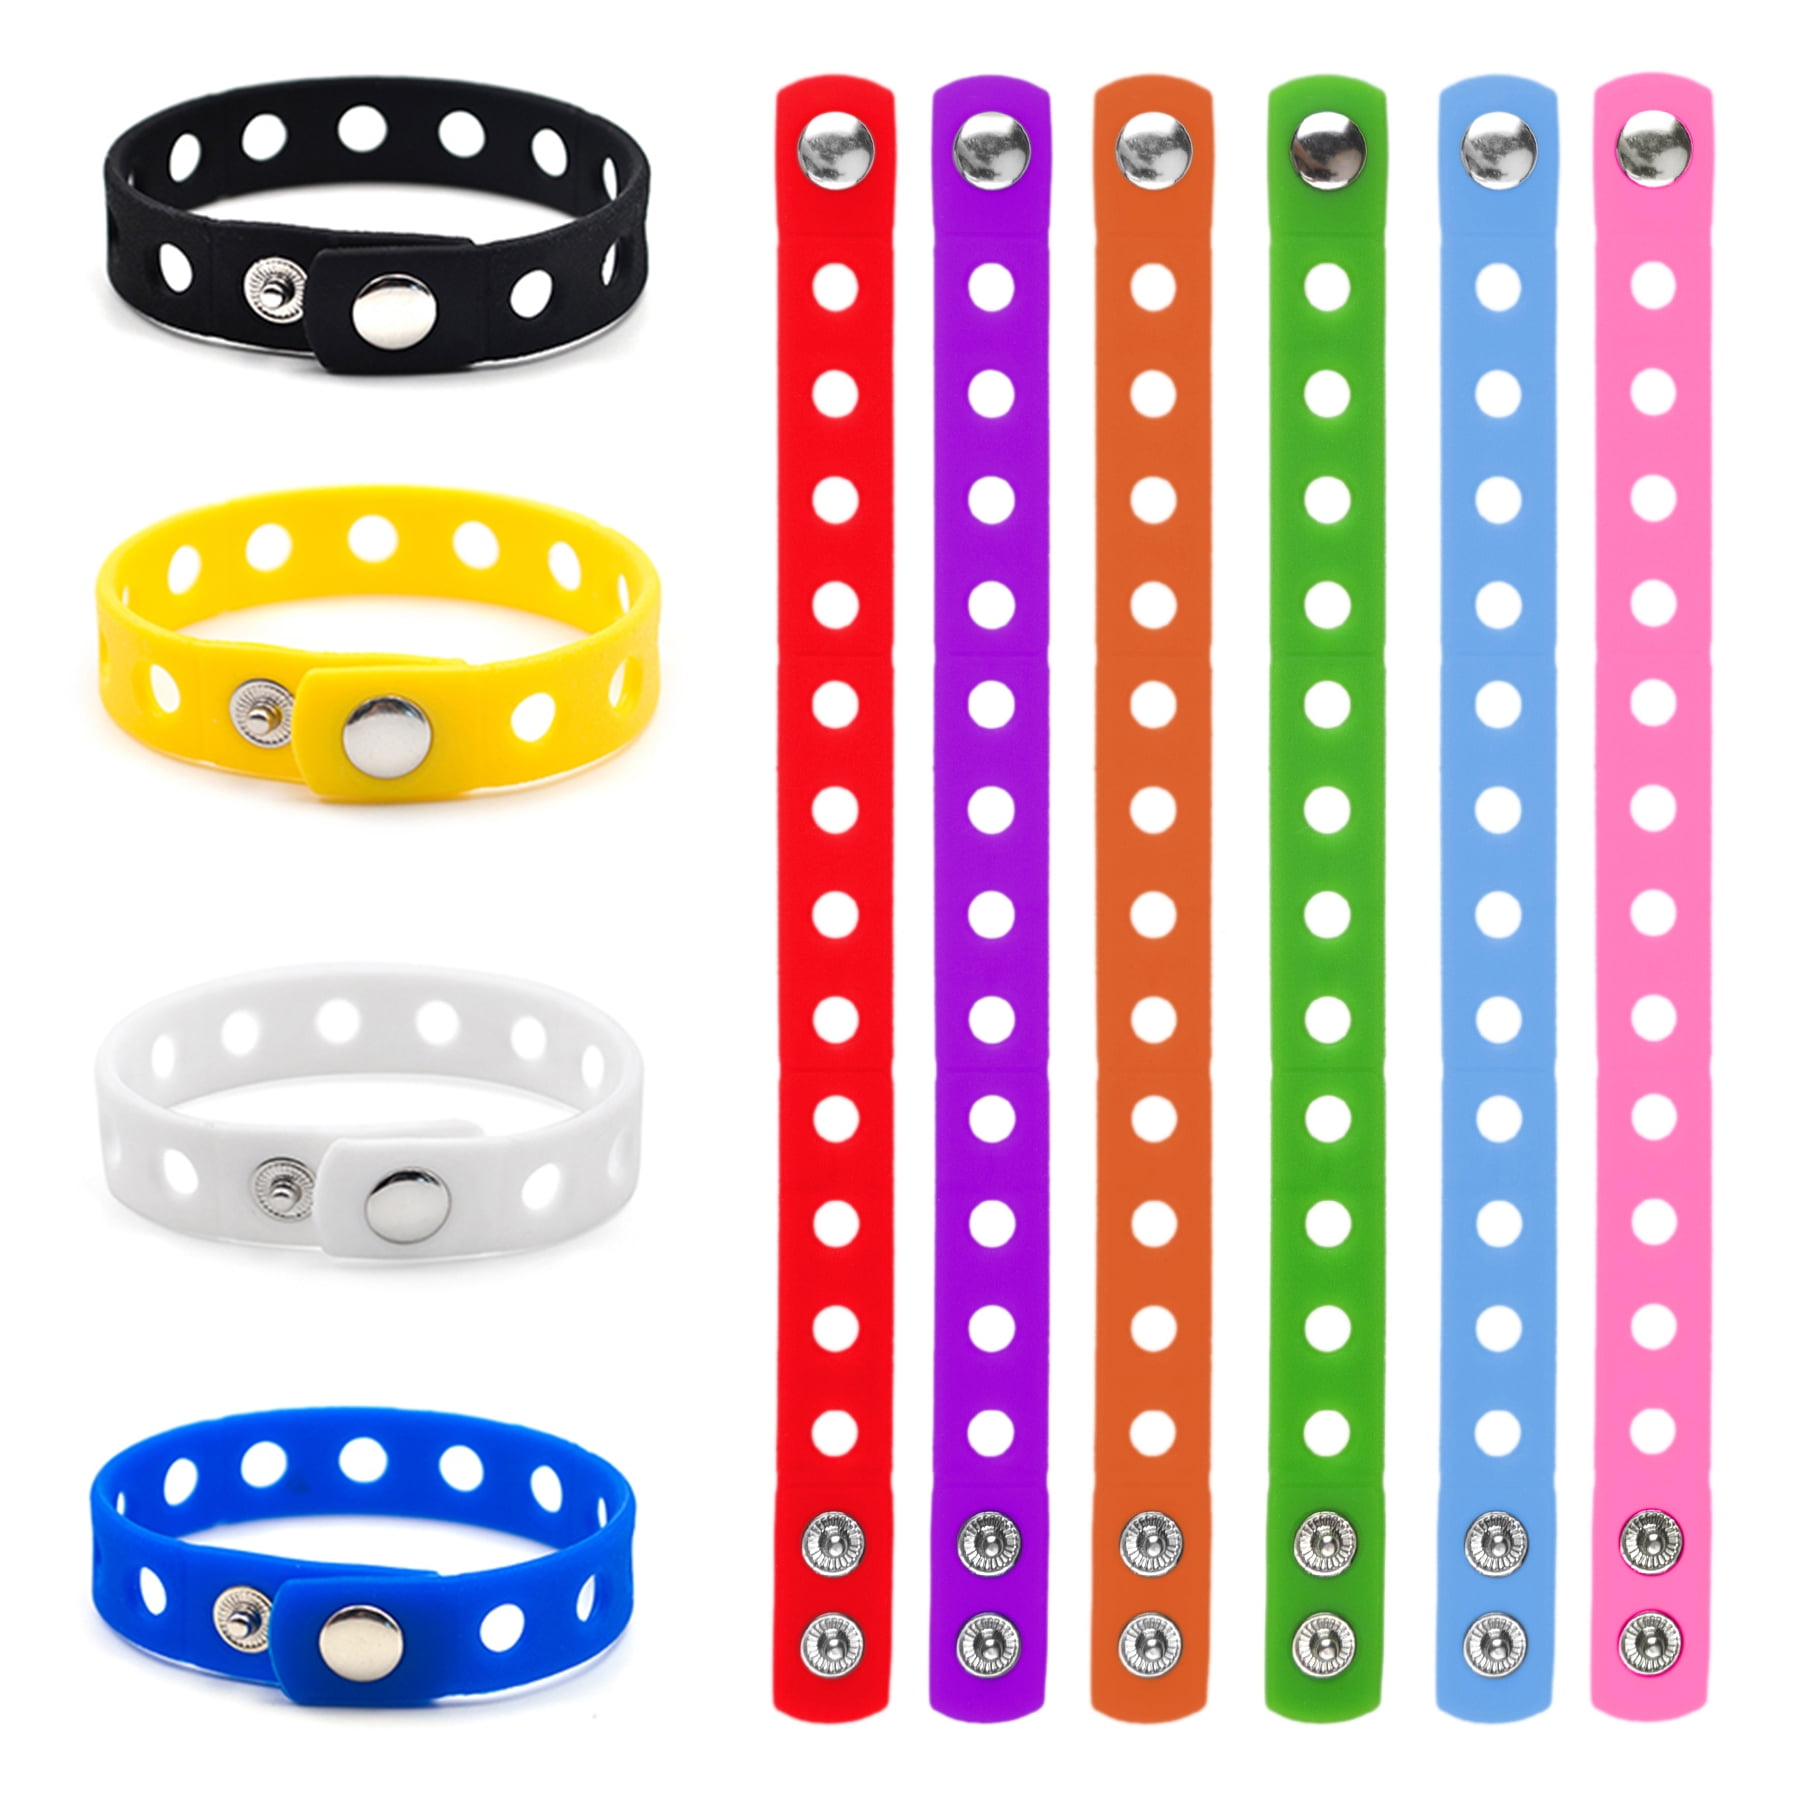 16 PCS Adjustable Silicone Wristbands Cute Multi-Color Rubber Bracelets with Holes for Shoe Charms Boys and Girls Birthday Gifts Party Supplies 